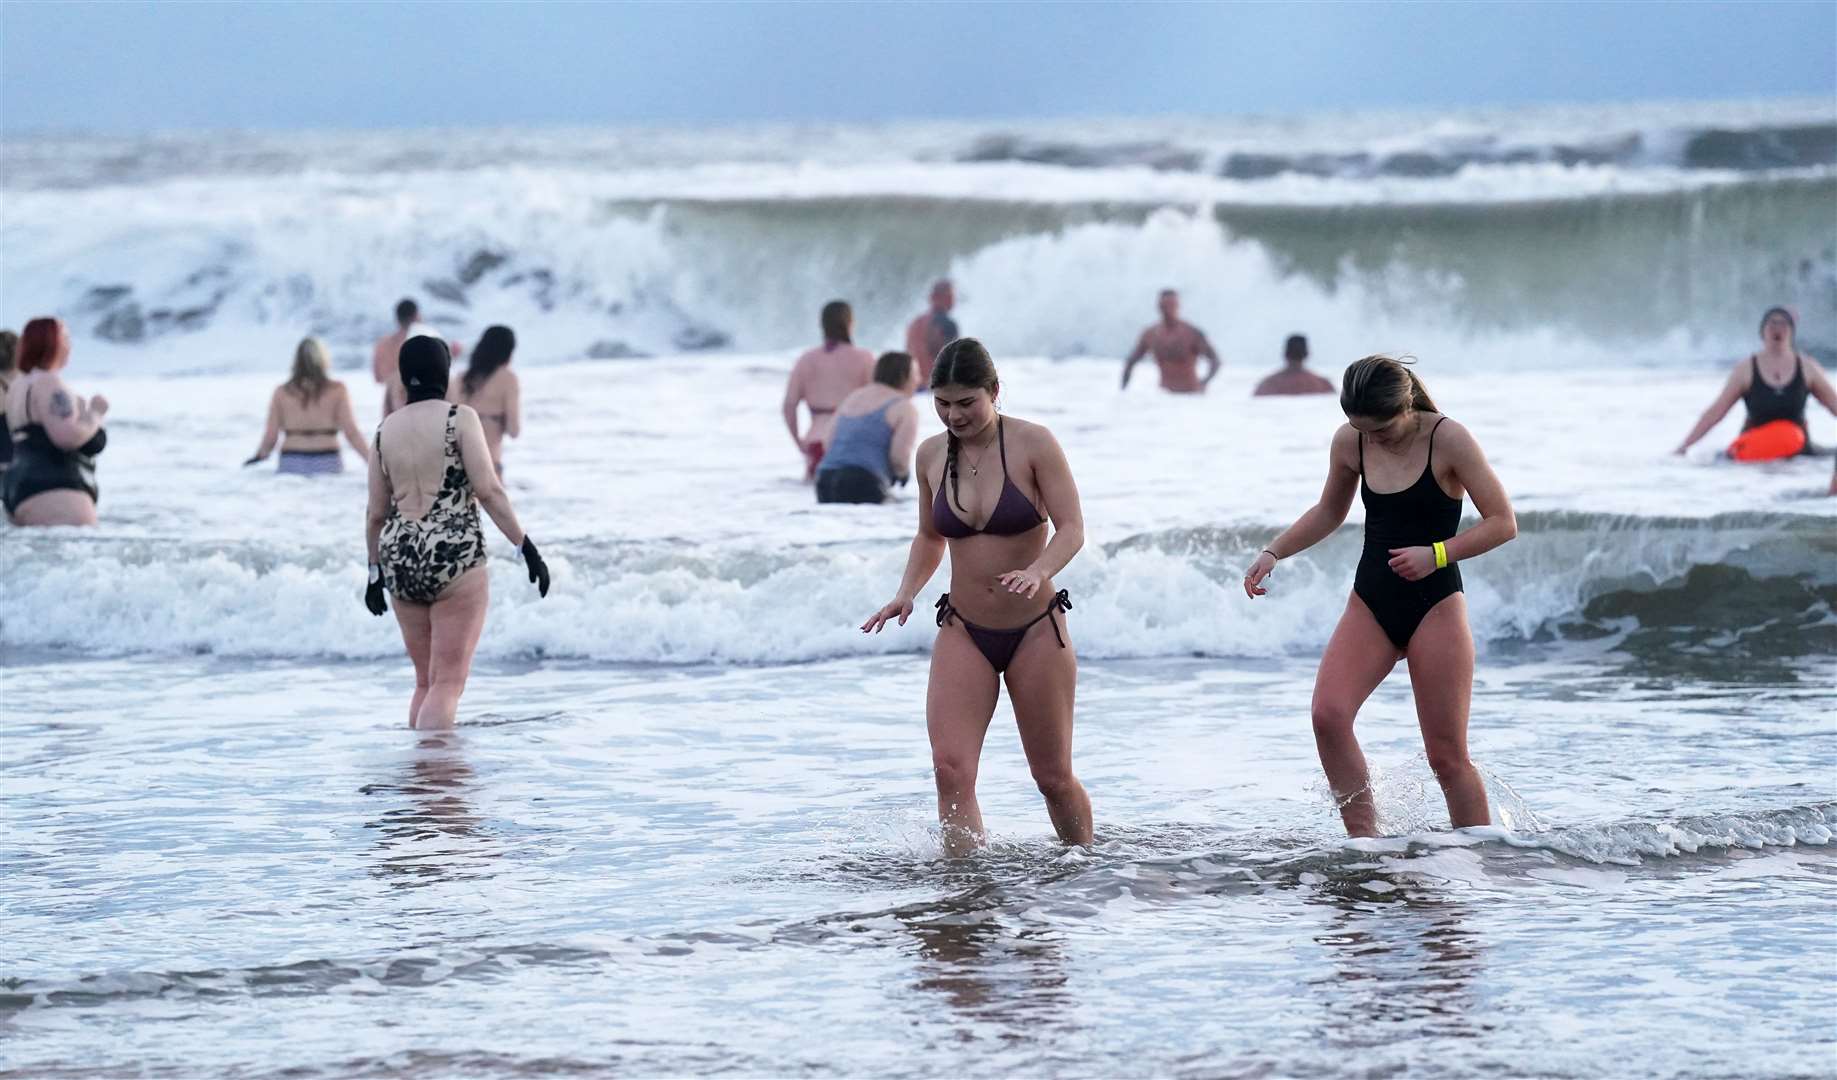 Swimmers brave the freezing conditions near Tynemouth to mark International Women’s Day (Owen Humphreys/PA)